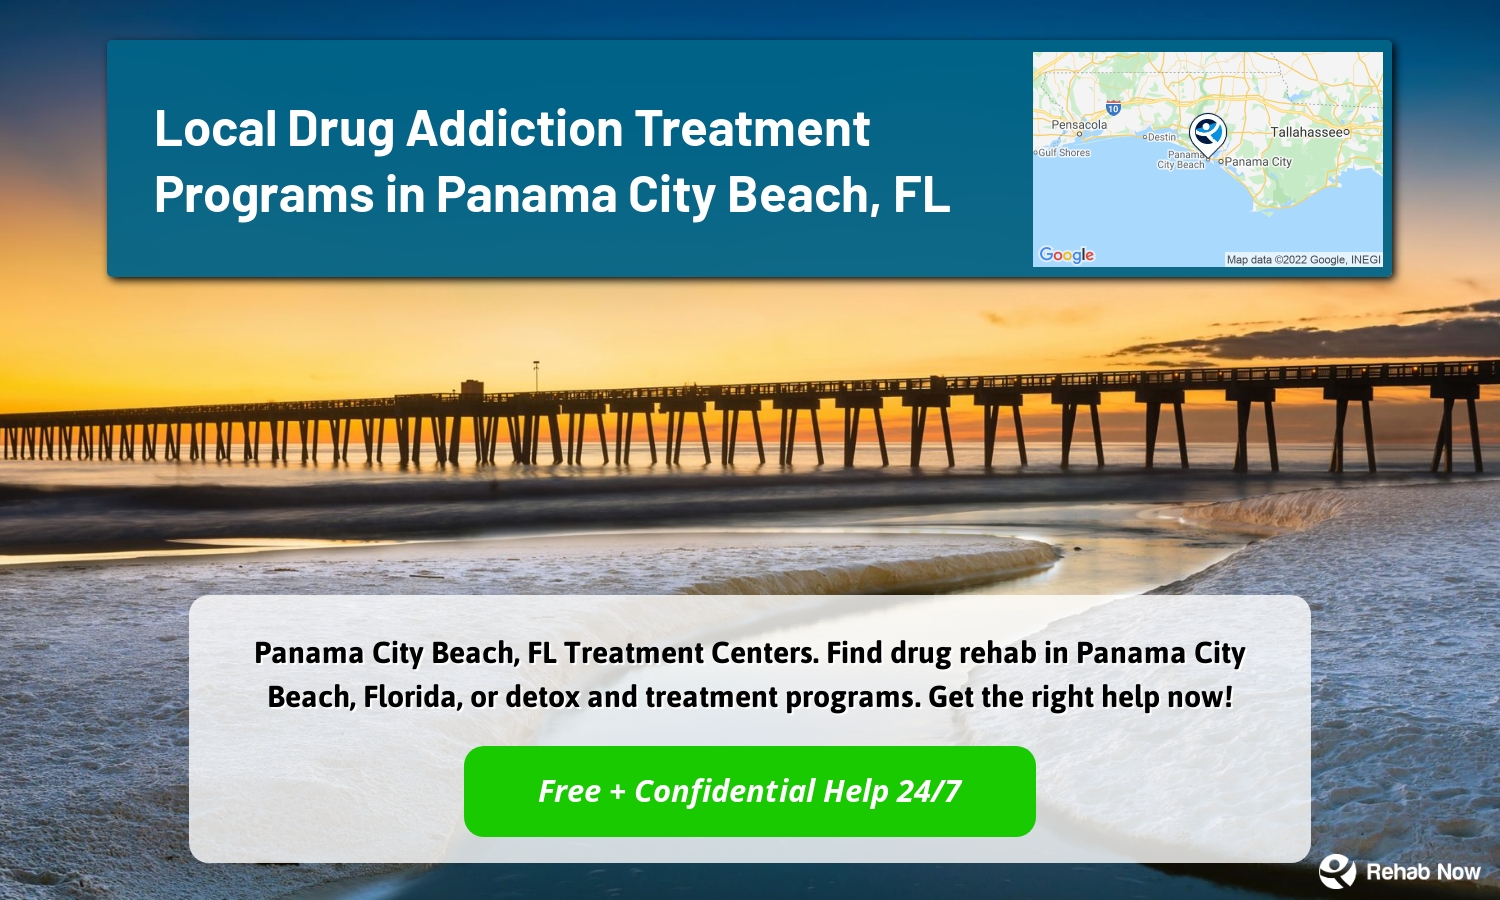 Panama City Beach, FL Treatment Centers. Find drug rehab in Panama City Beach, Florida, or detox and treatment programs. Get the right help now!